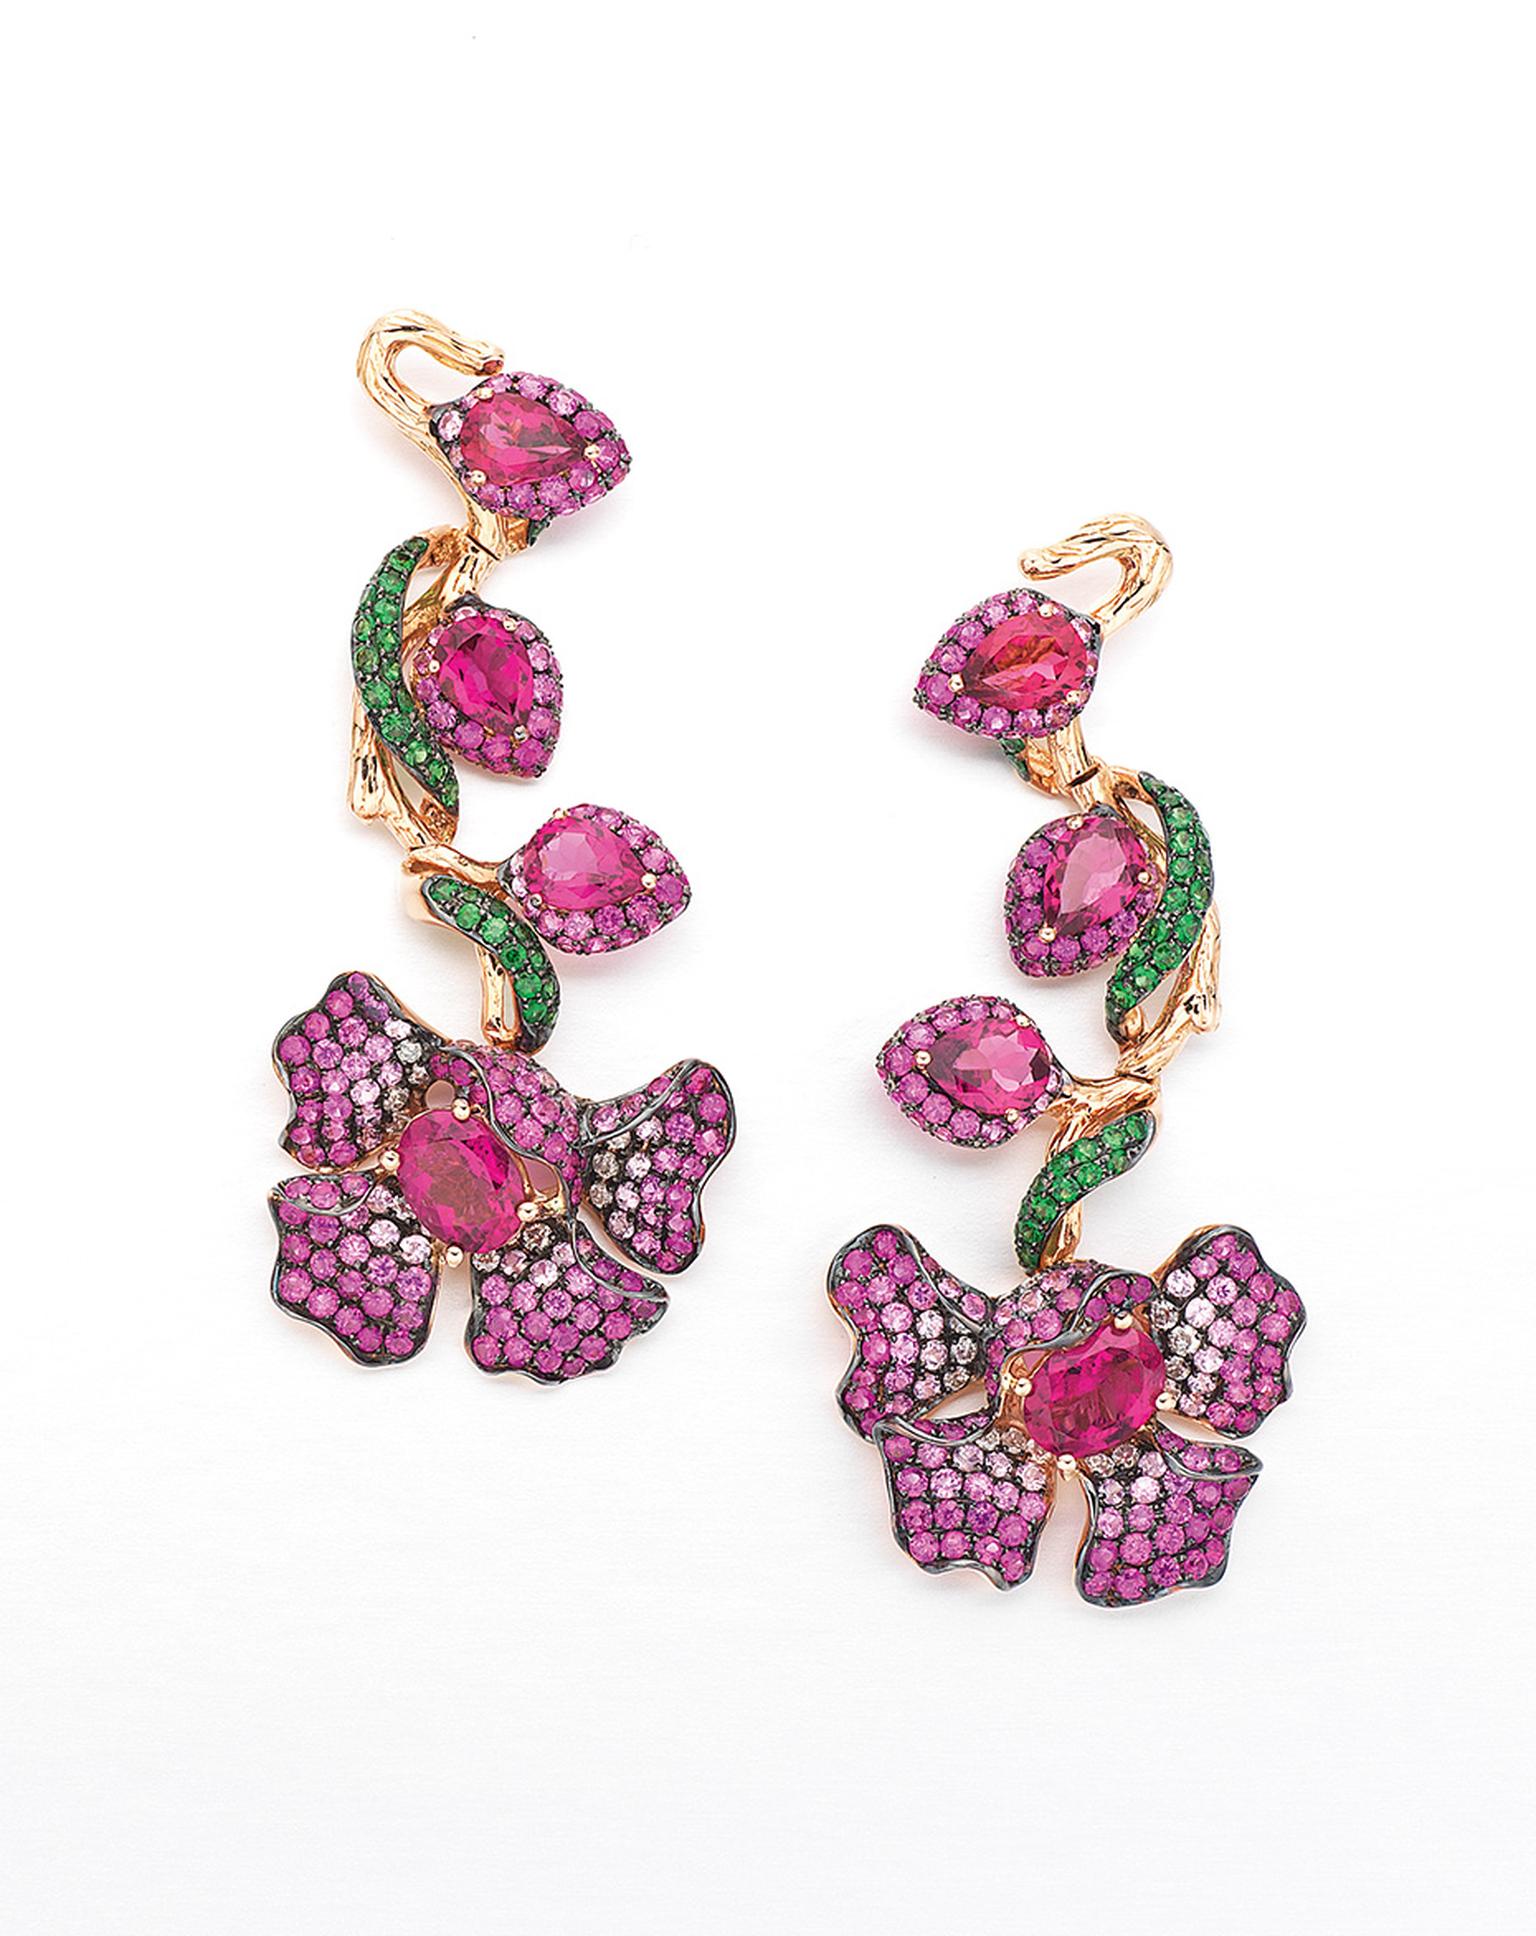 Wendy Yue’s diamond arrings with rubellites, white sapphires, pink sapphires and tsavourites.